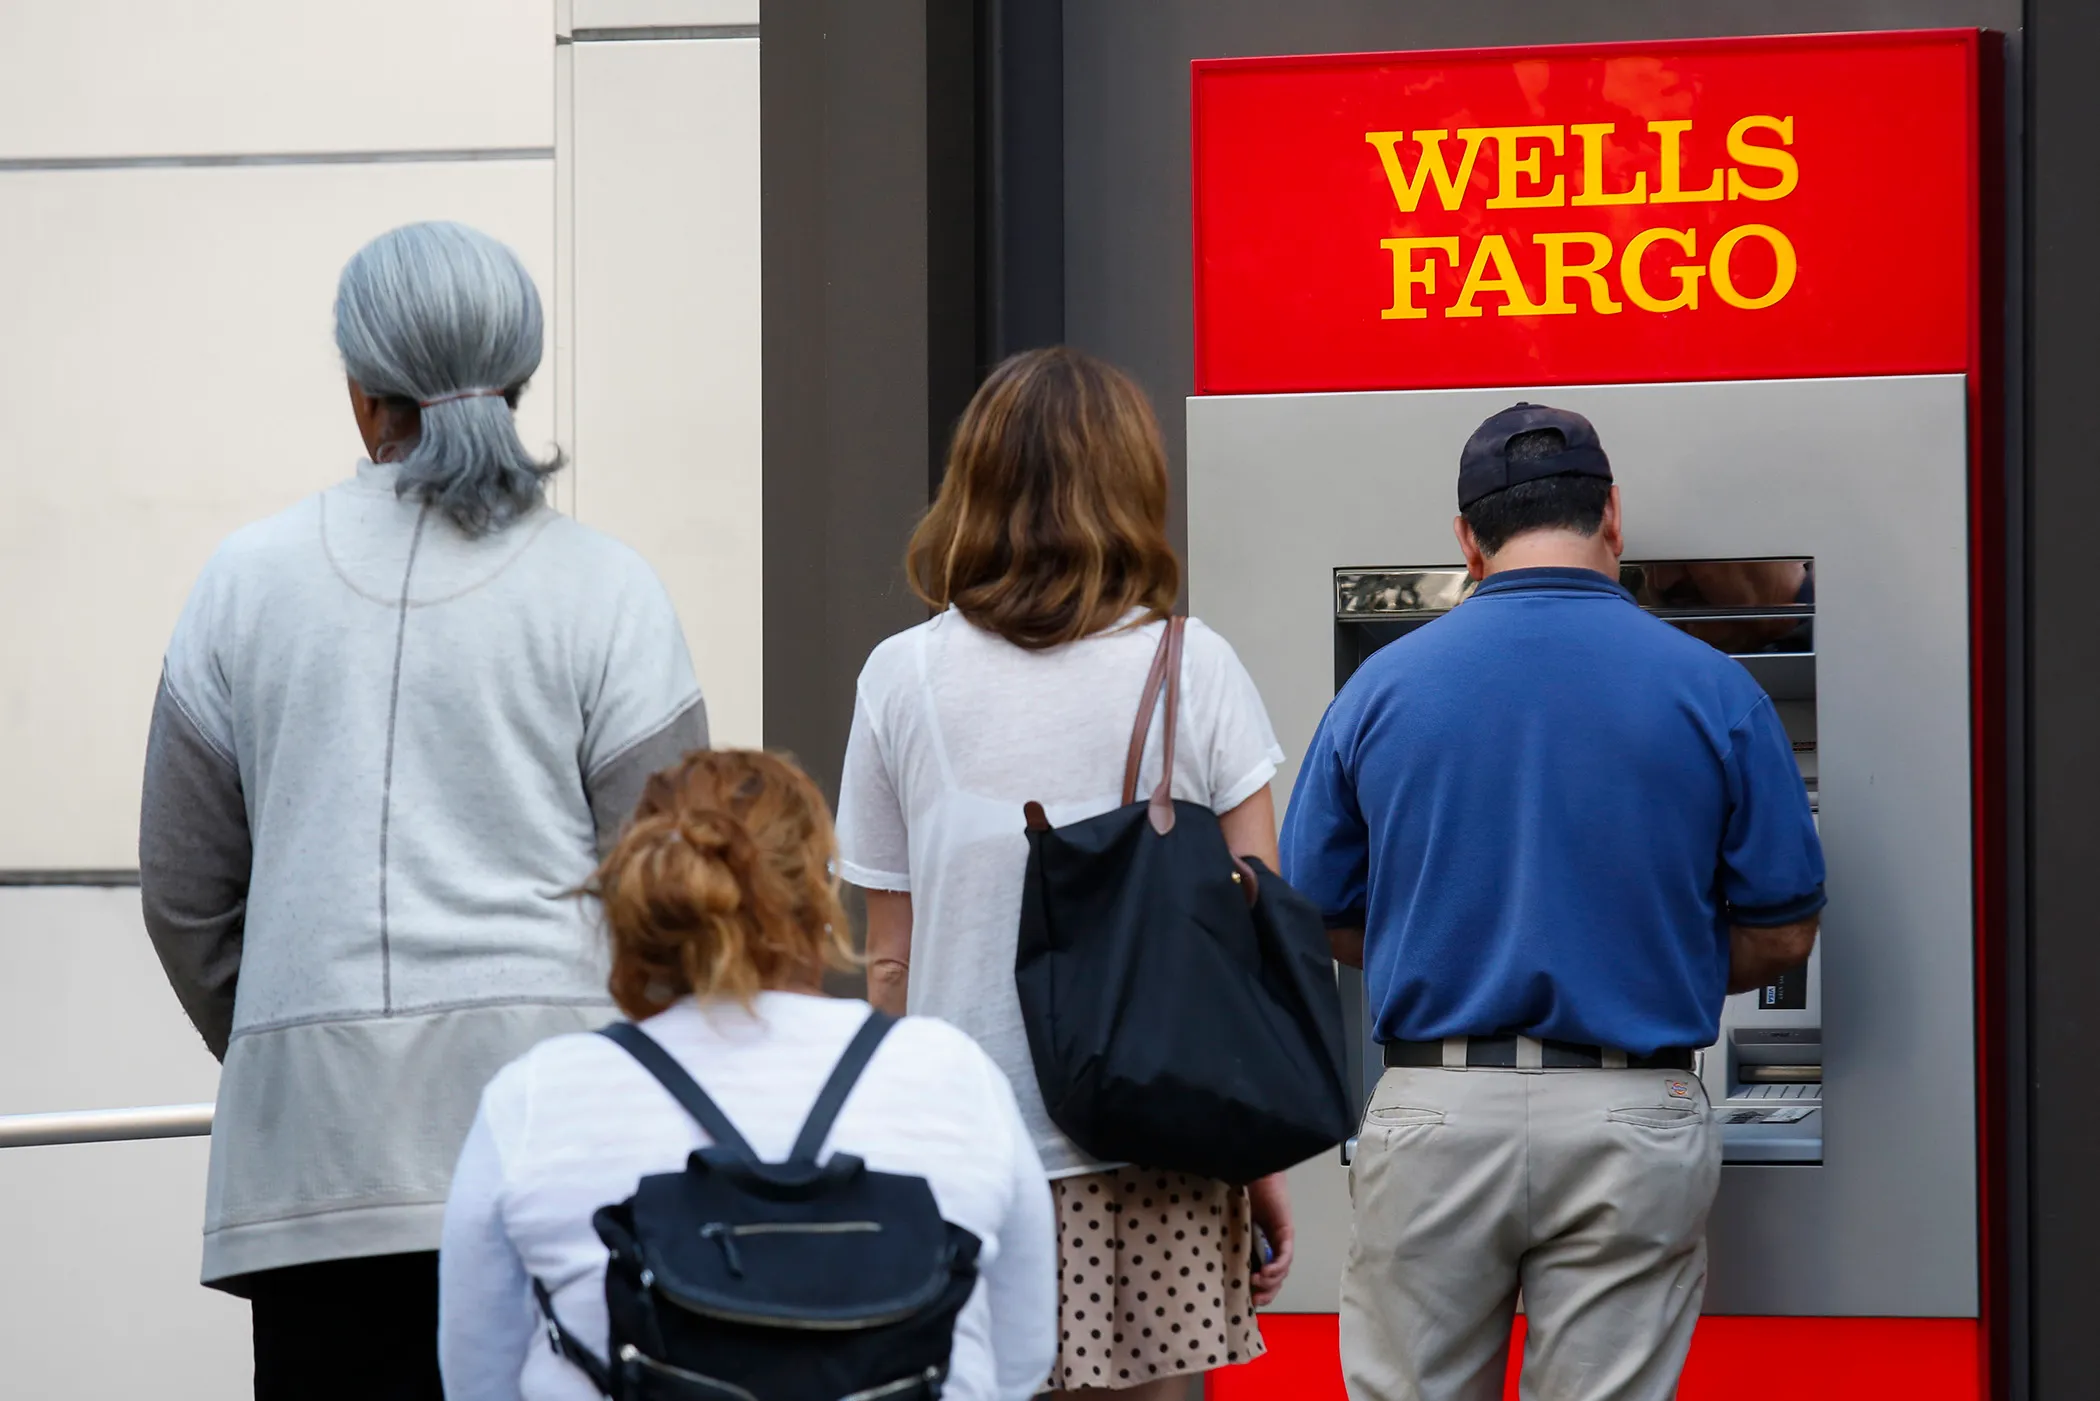 America's 3 Biggest Banks Collected $6 Billion in ATM and Overdraft Fees in 2015